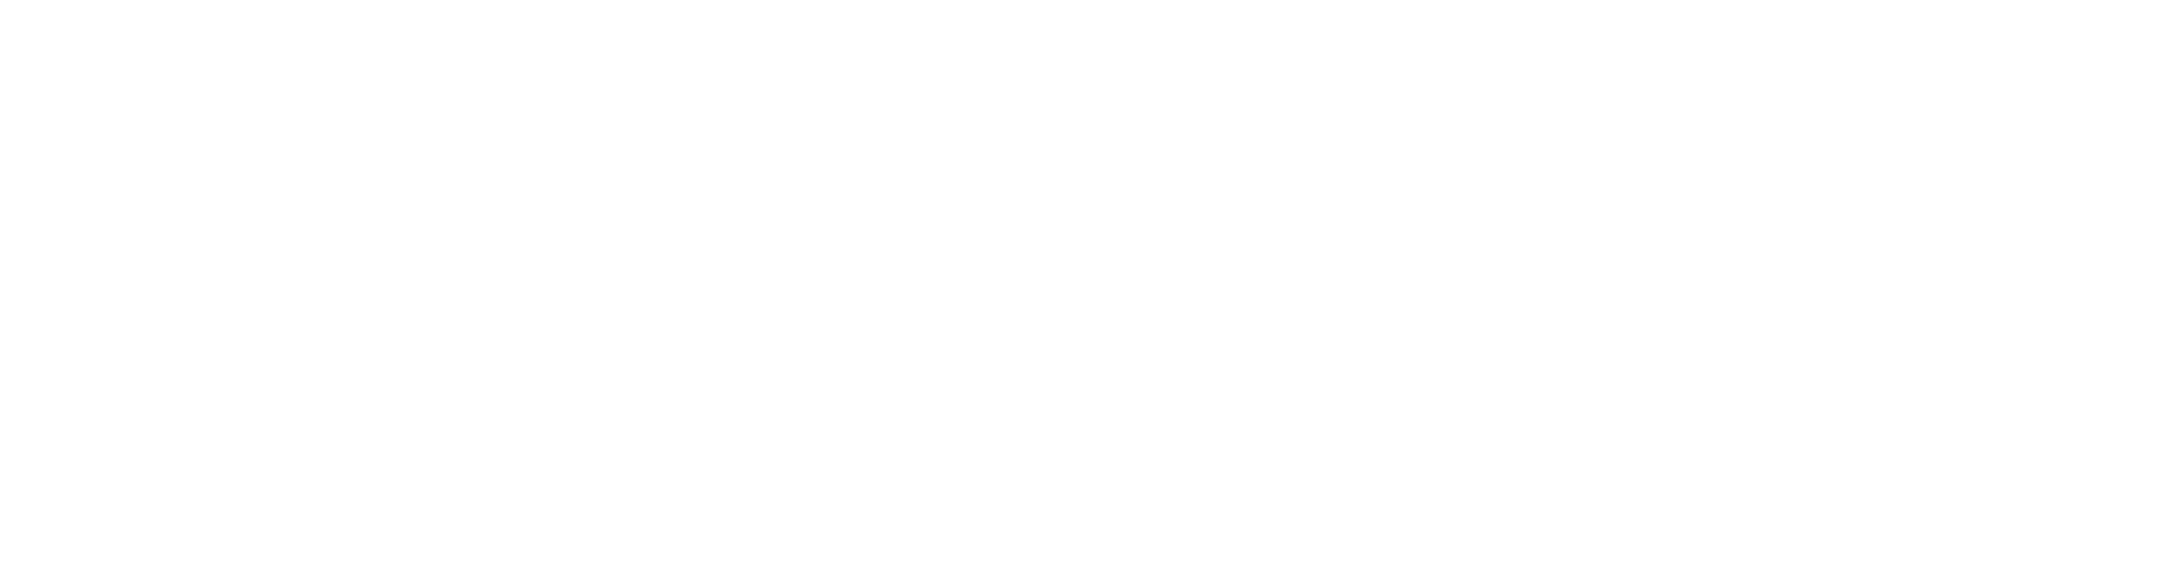 Envision Strategy+Design